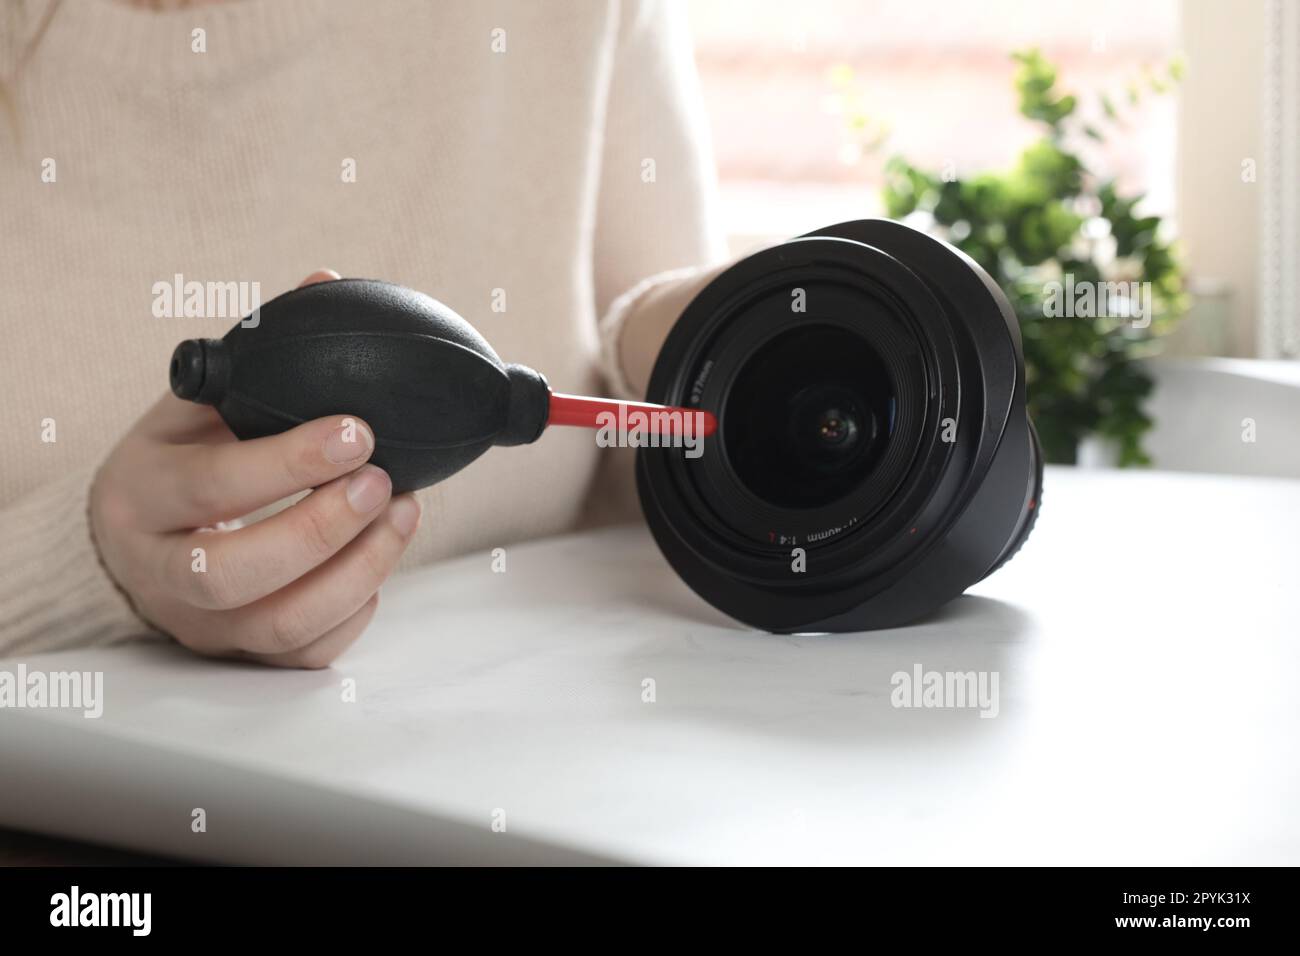 Cleaning digital camera lens, hands cleaning dust from front of lens with a special cleaning kit airbomb on desk Stock Photo